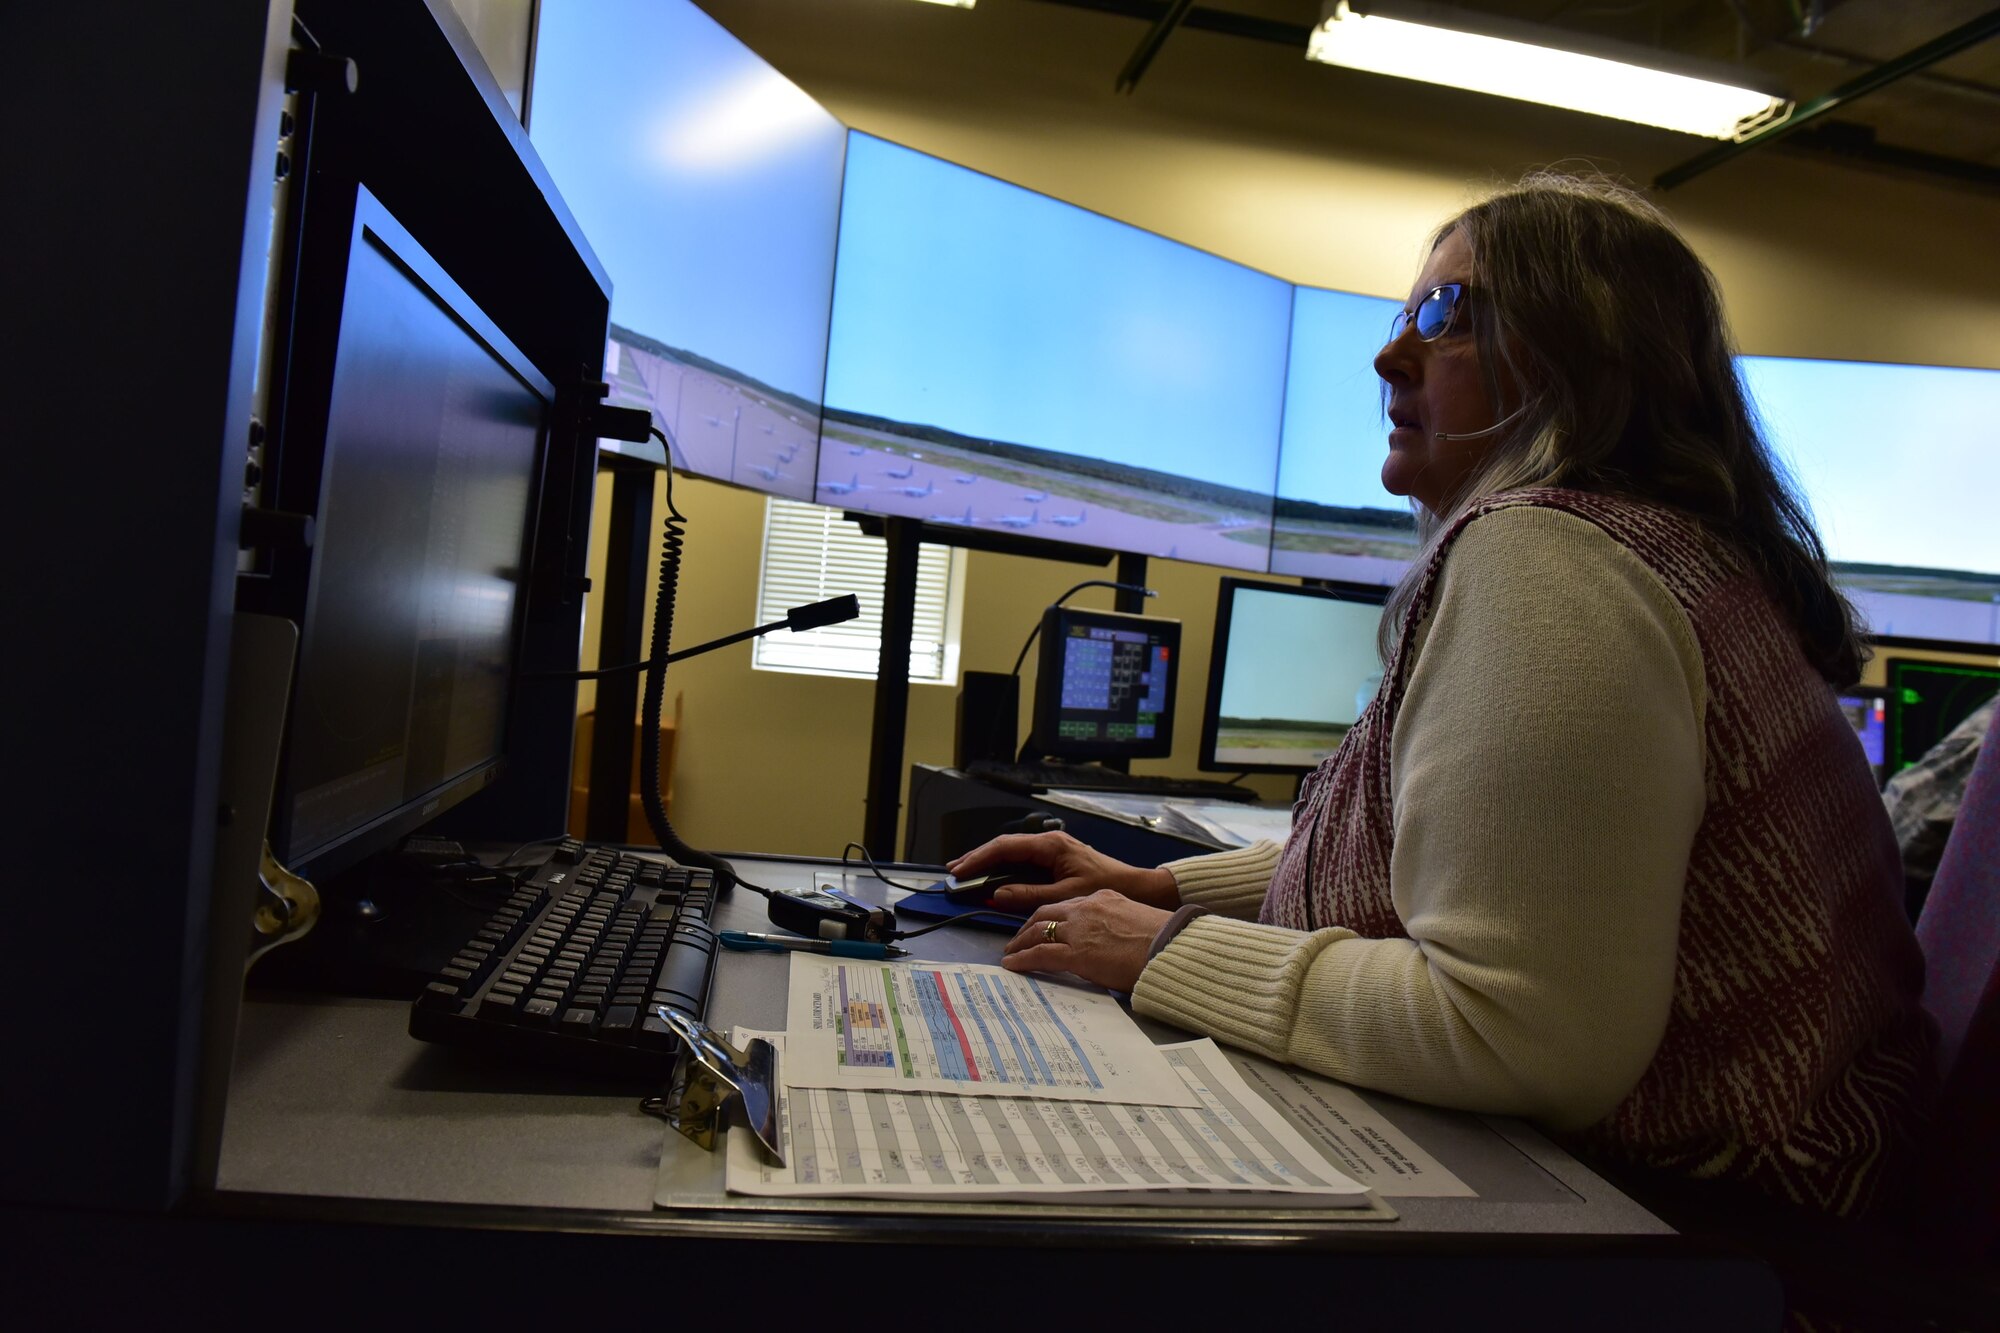 Airmen perform training using simulations in the air traffic control tower.